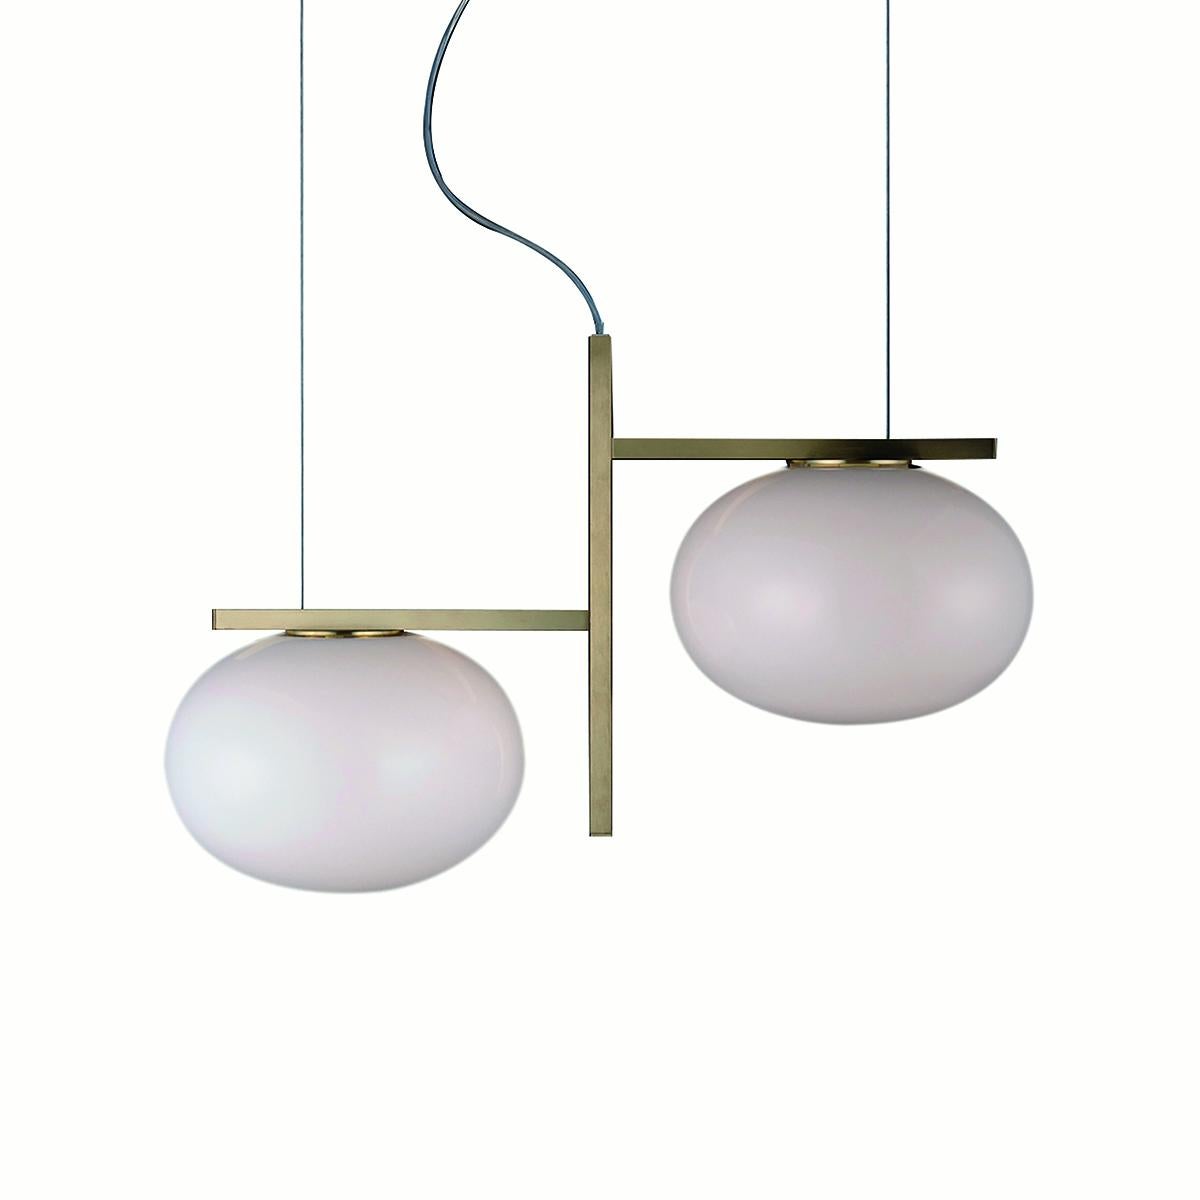 Suspension lamp 'Alba' designed by Mariana Pellegrino Soto in 2017.
Suspension lamp giving diffused light in polished opaline blown-glass. Satin brass or anodic bronze finish structure with rectangular profile. Manufactured by Oluce, Italy.

The